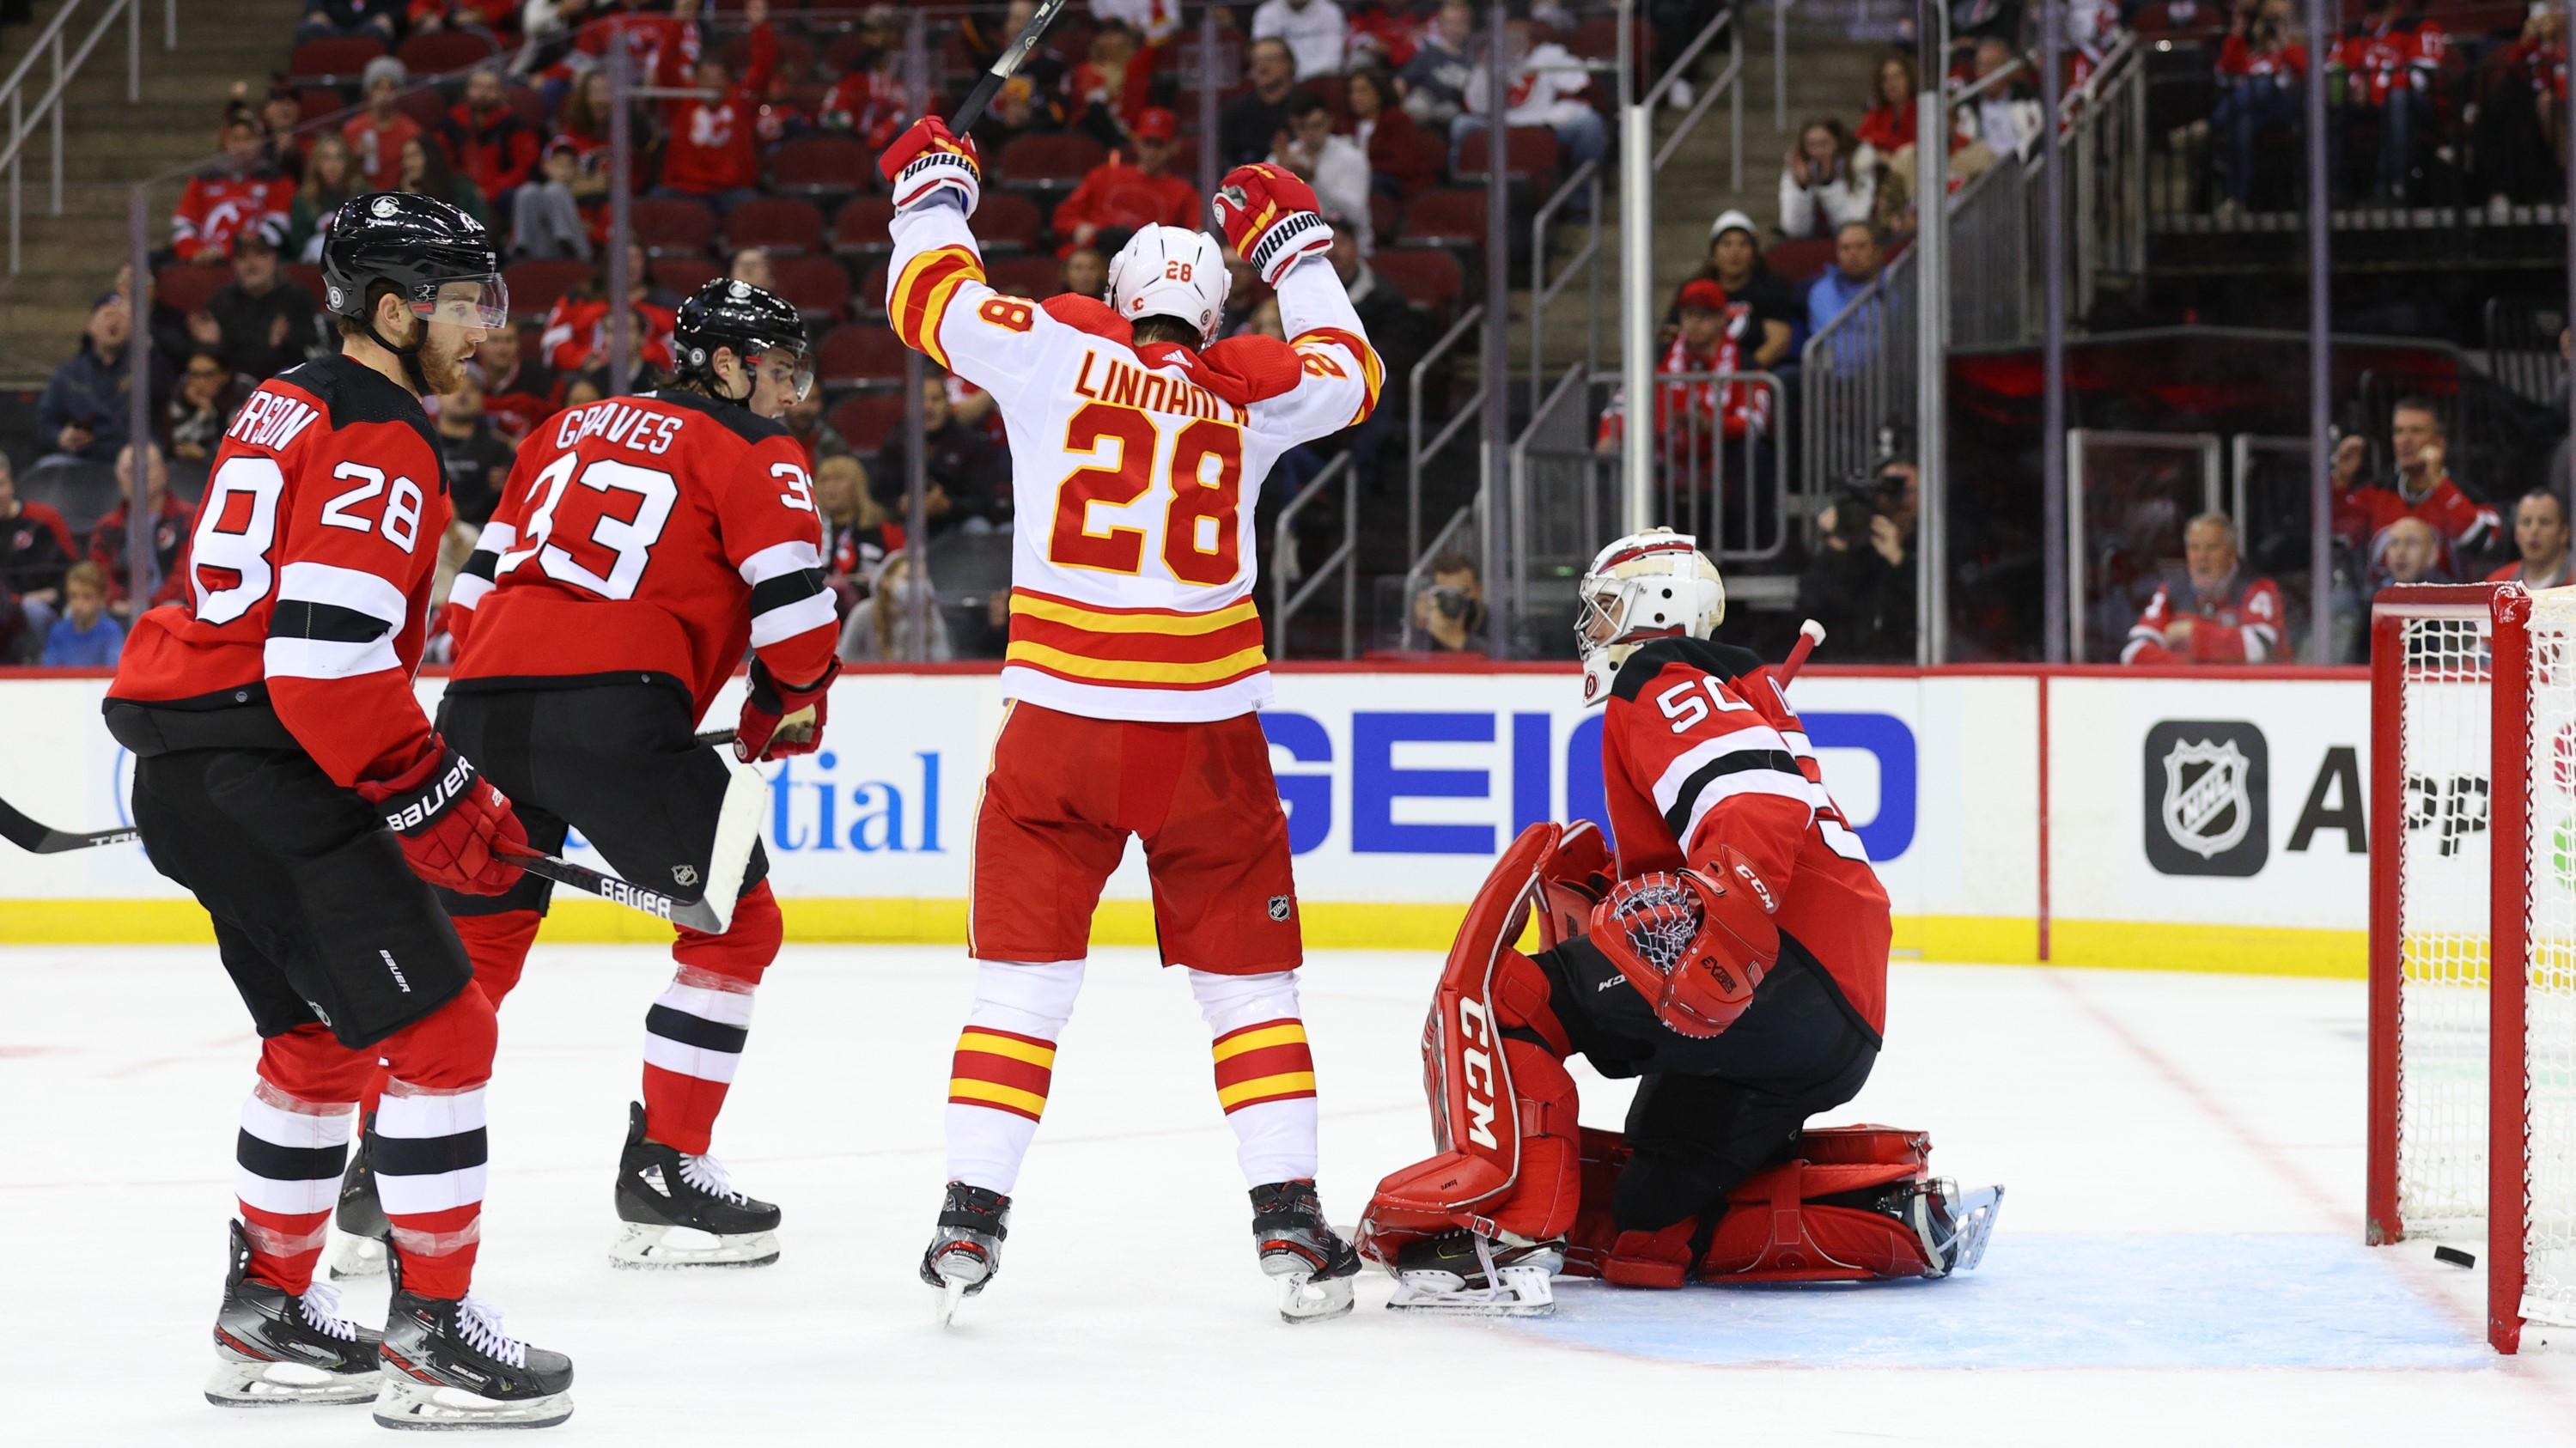 Oct 26, 2021; Newark, New Jersey, USA; Calgary Flames center Elias Lindholm (28) celebrates his goal on New Jersey Devils goaltender Nico Daws (50) during the first period at Prudential Center. Mandatory Credit: Ed Mulholland-USA TODAY Sports / Ed Mulholland-USA TODAY Sports